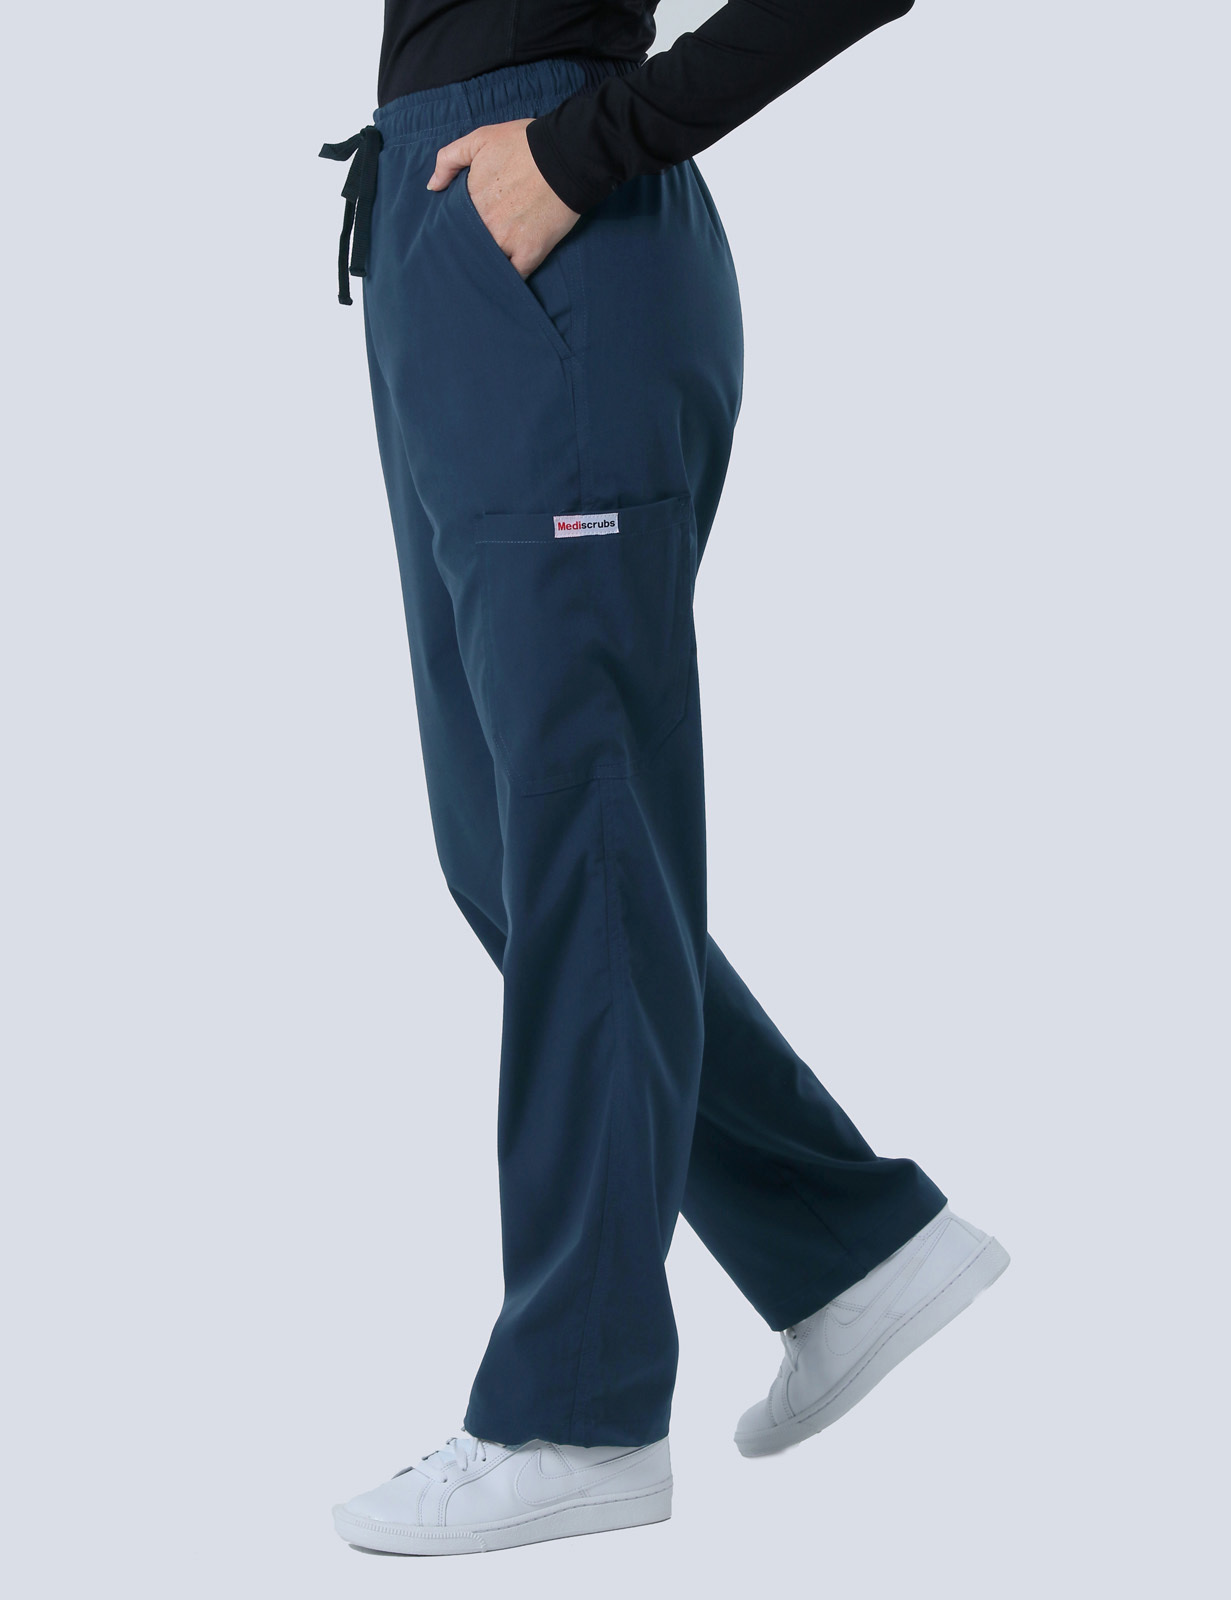 Inglewood MPHS - CN (Women's Fit Solid Scrub Top and Cargo Pants in Navy incl Logos)